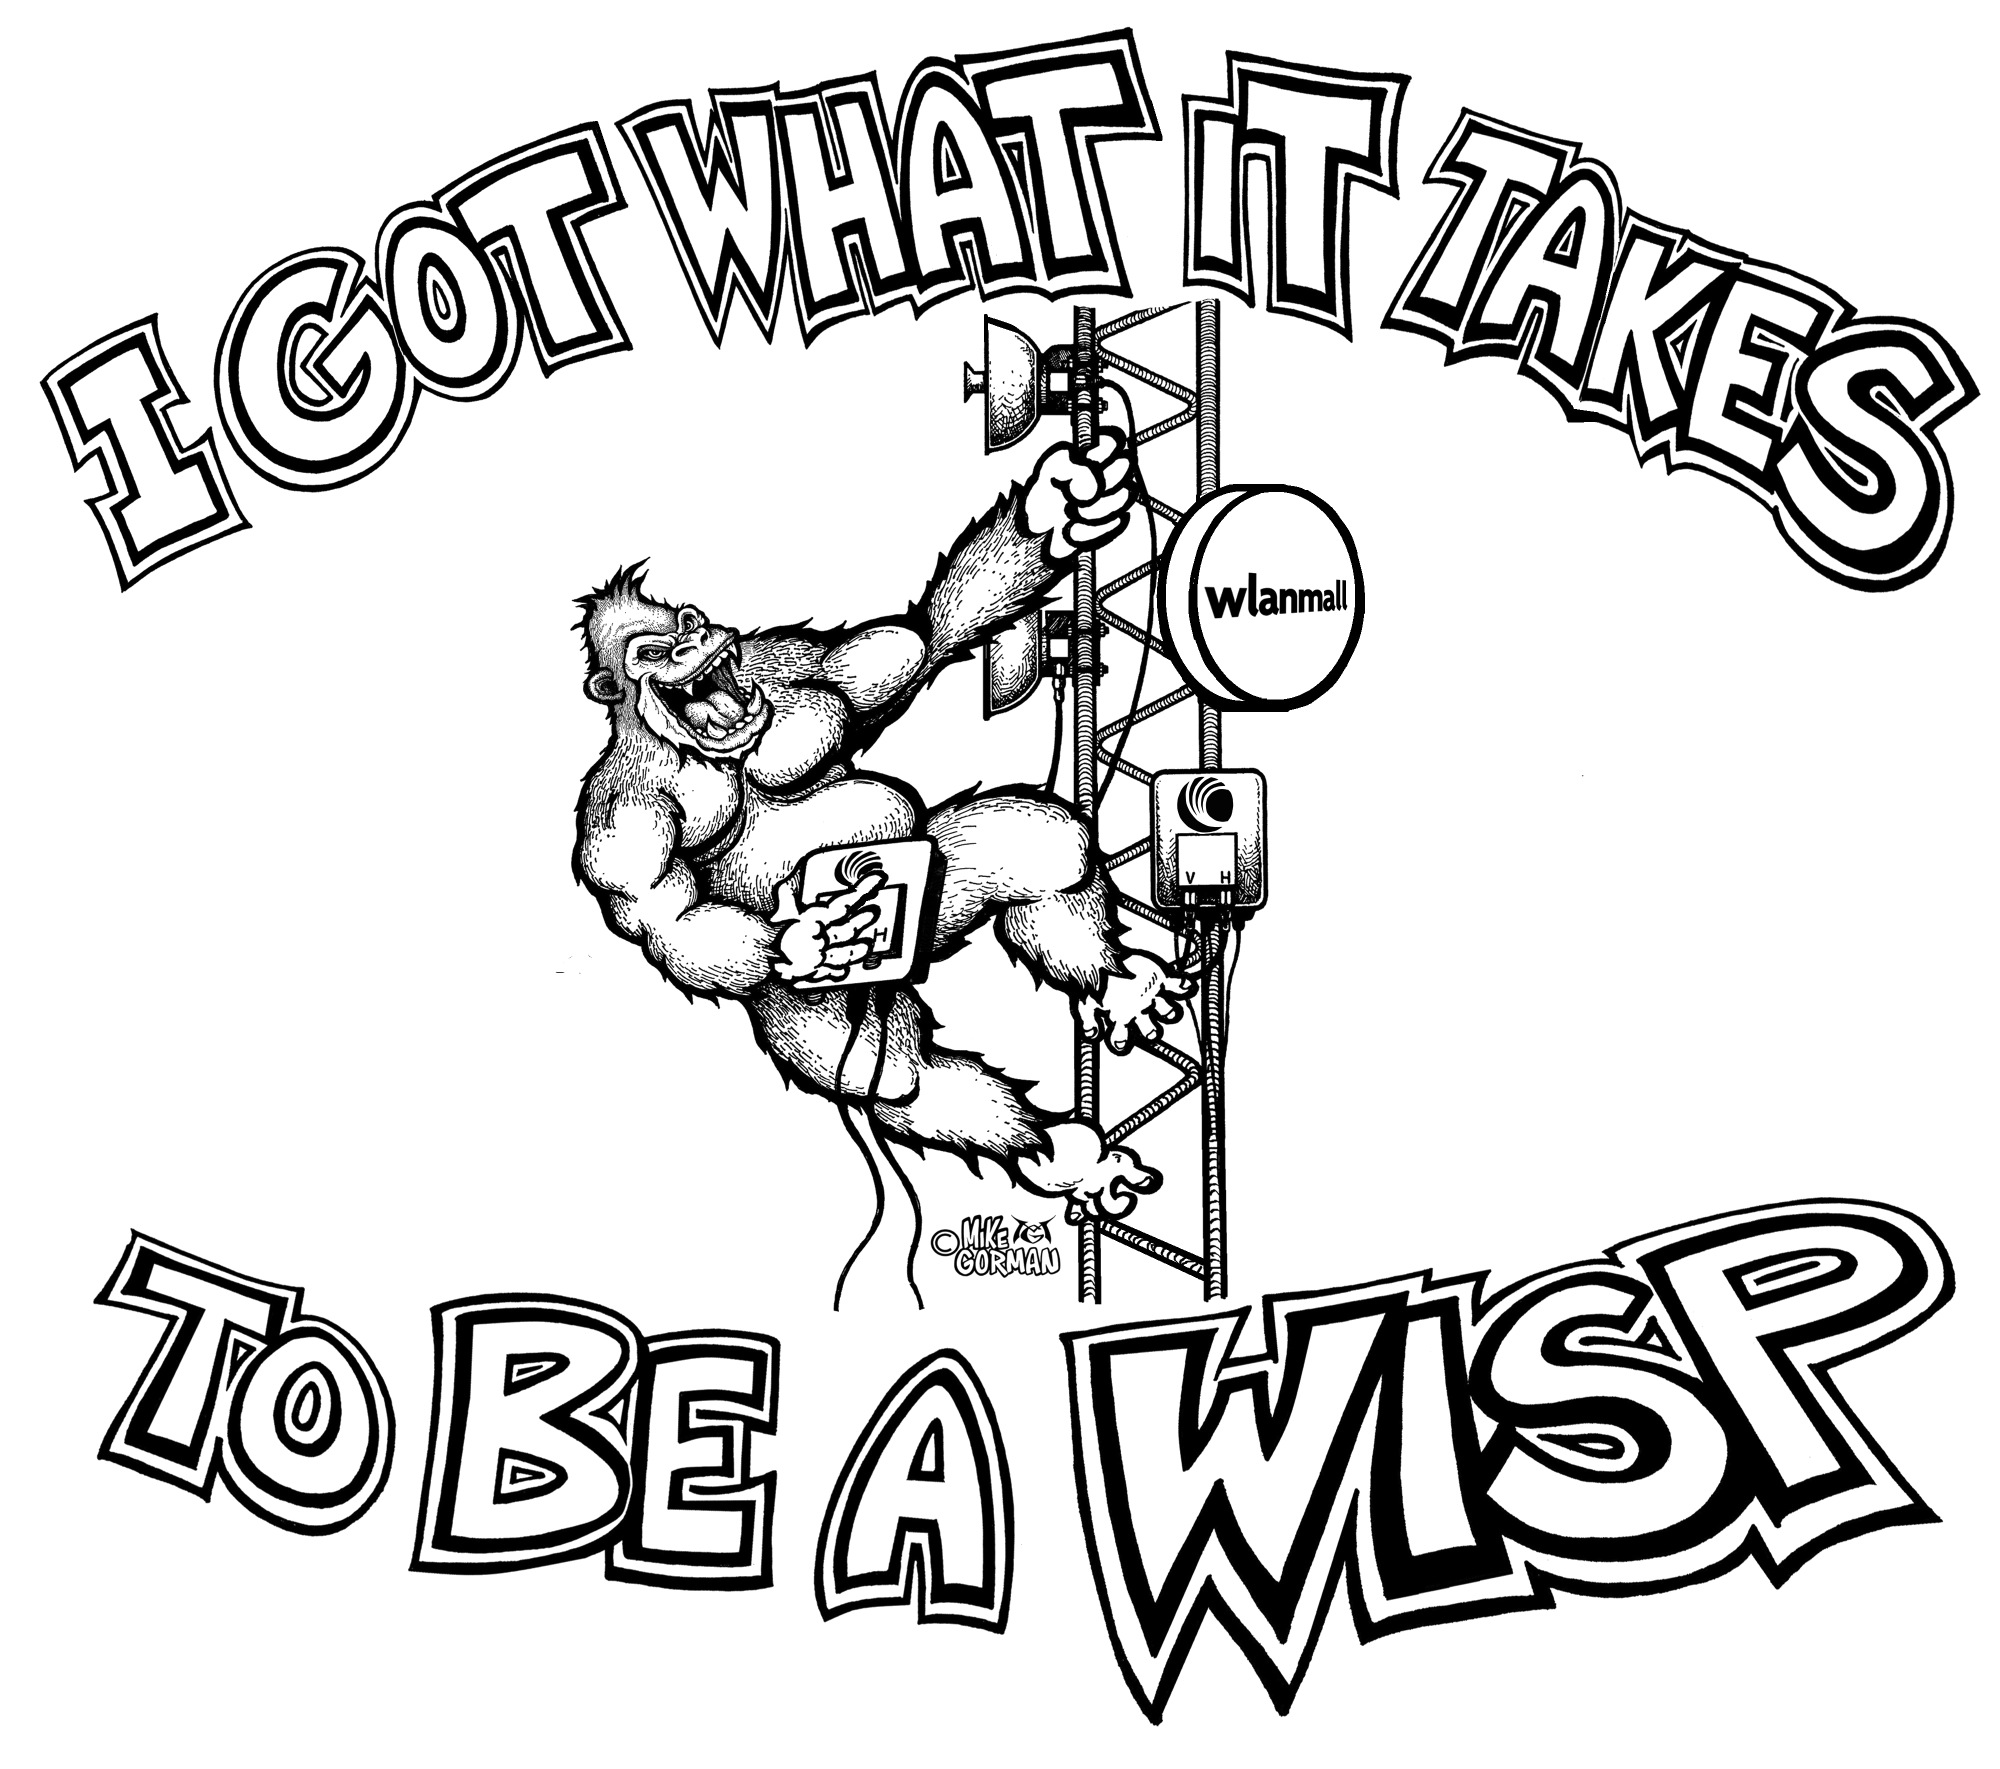 WISPS & Tower Technicians: sign up for a free T-Shirt at http://igwit.tumblr.com/.